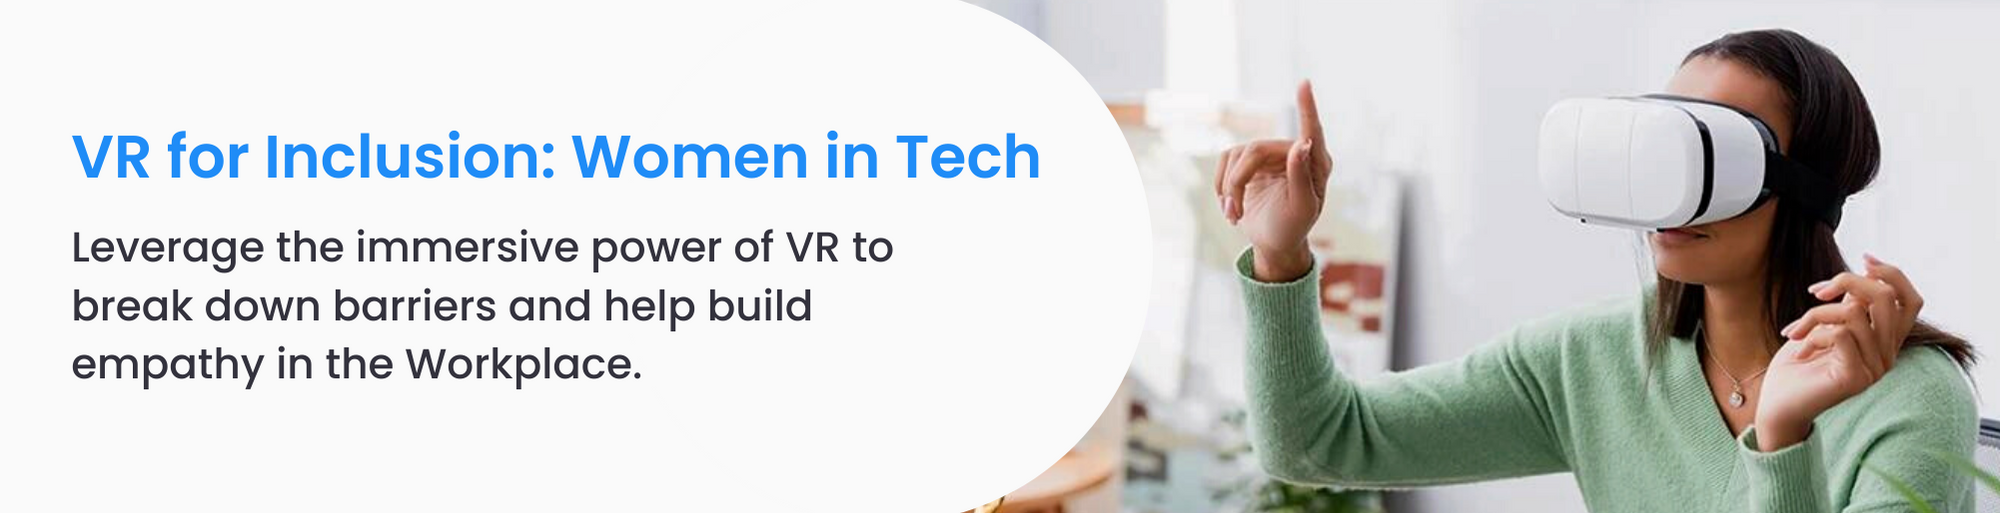 VR for Inclusion Women in Tech